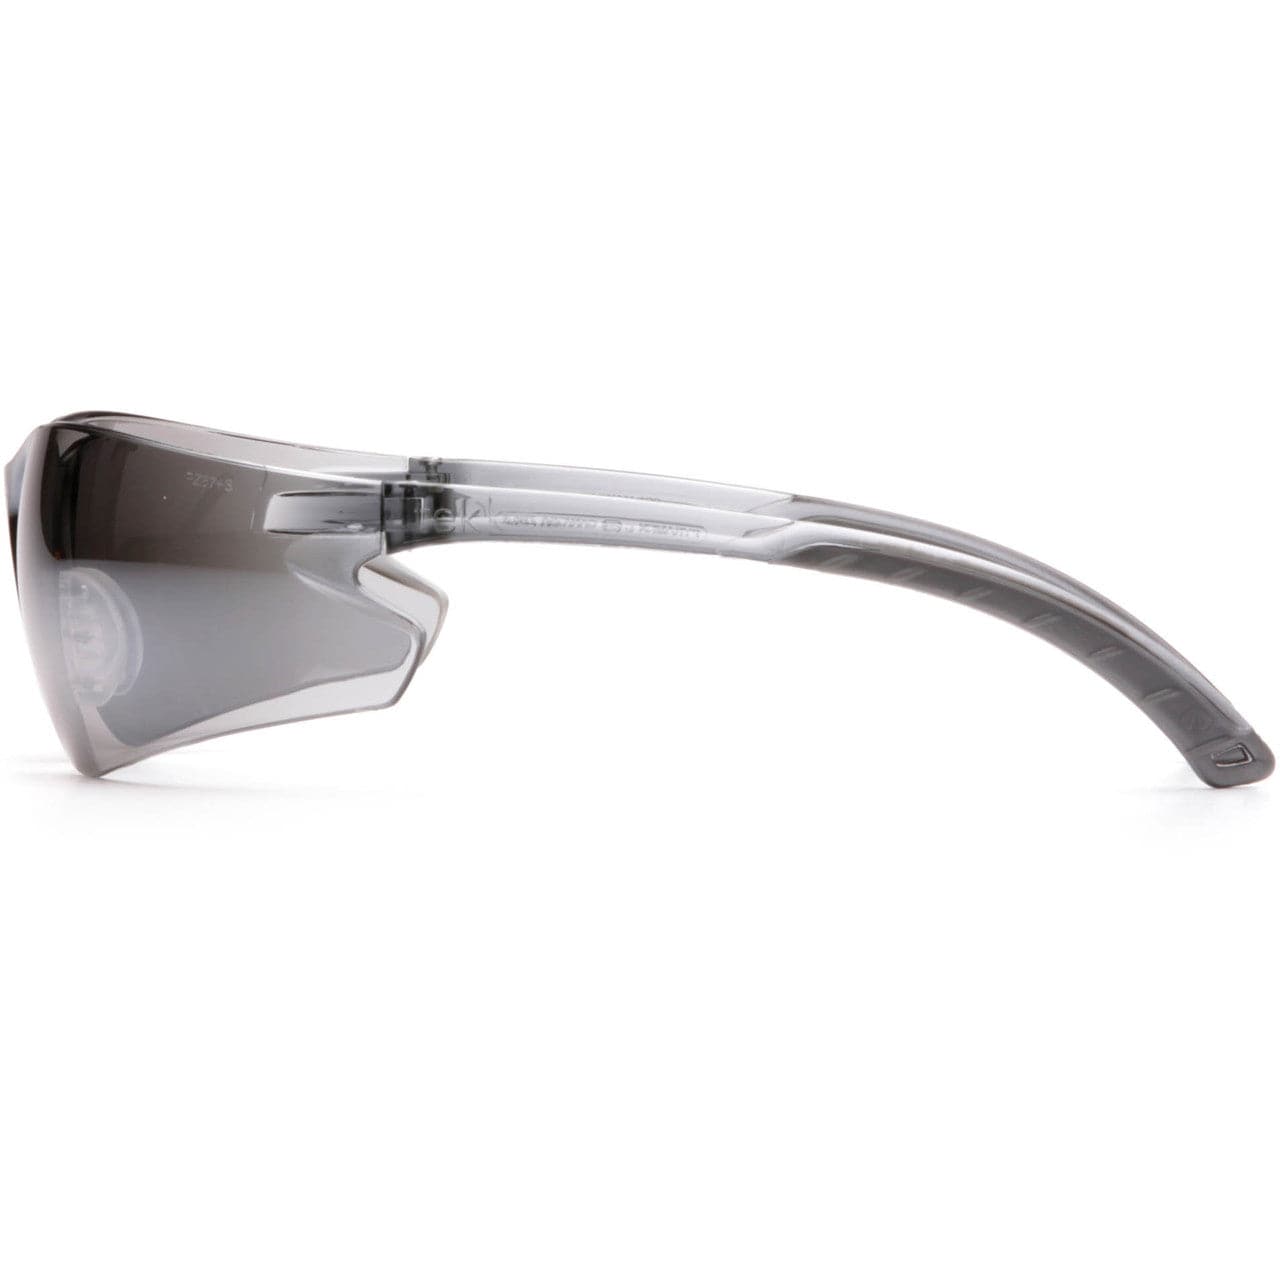 Pyramex Itek Safety Glasses with Silver Mirror Lens S5870S Side View